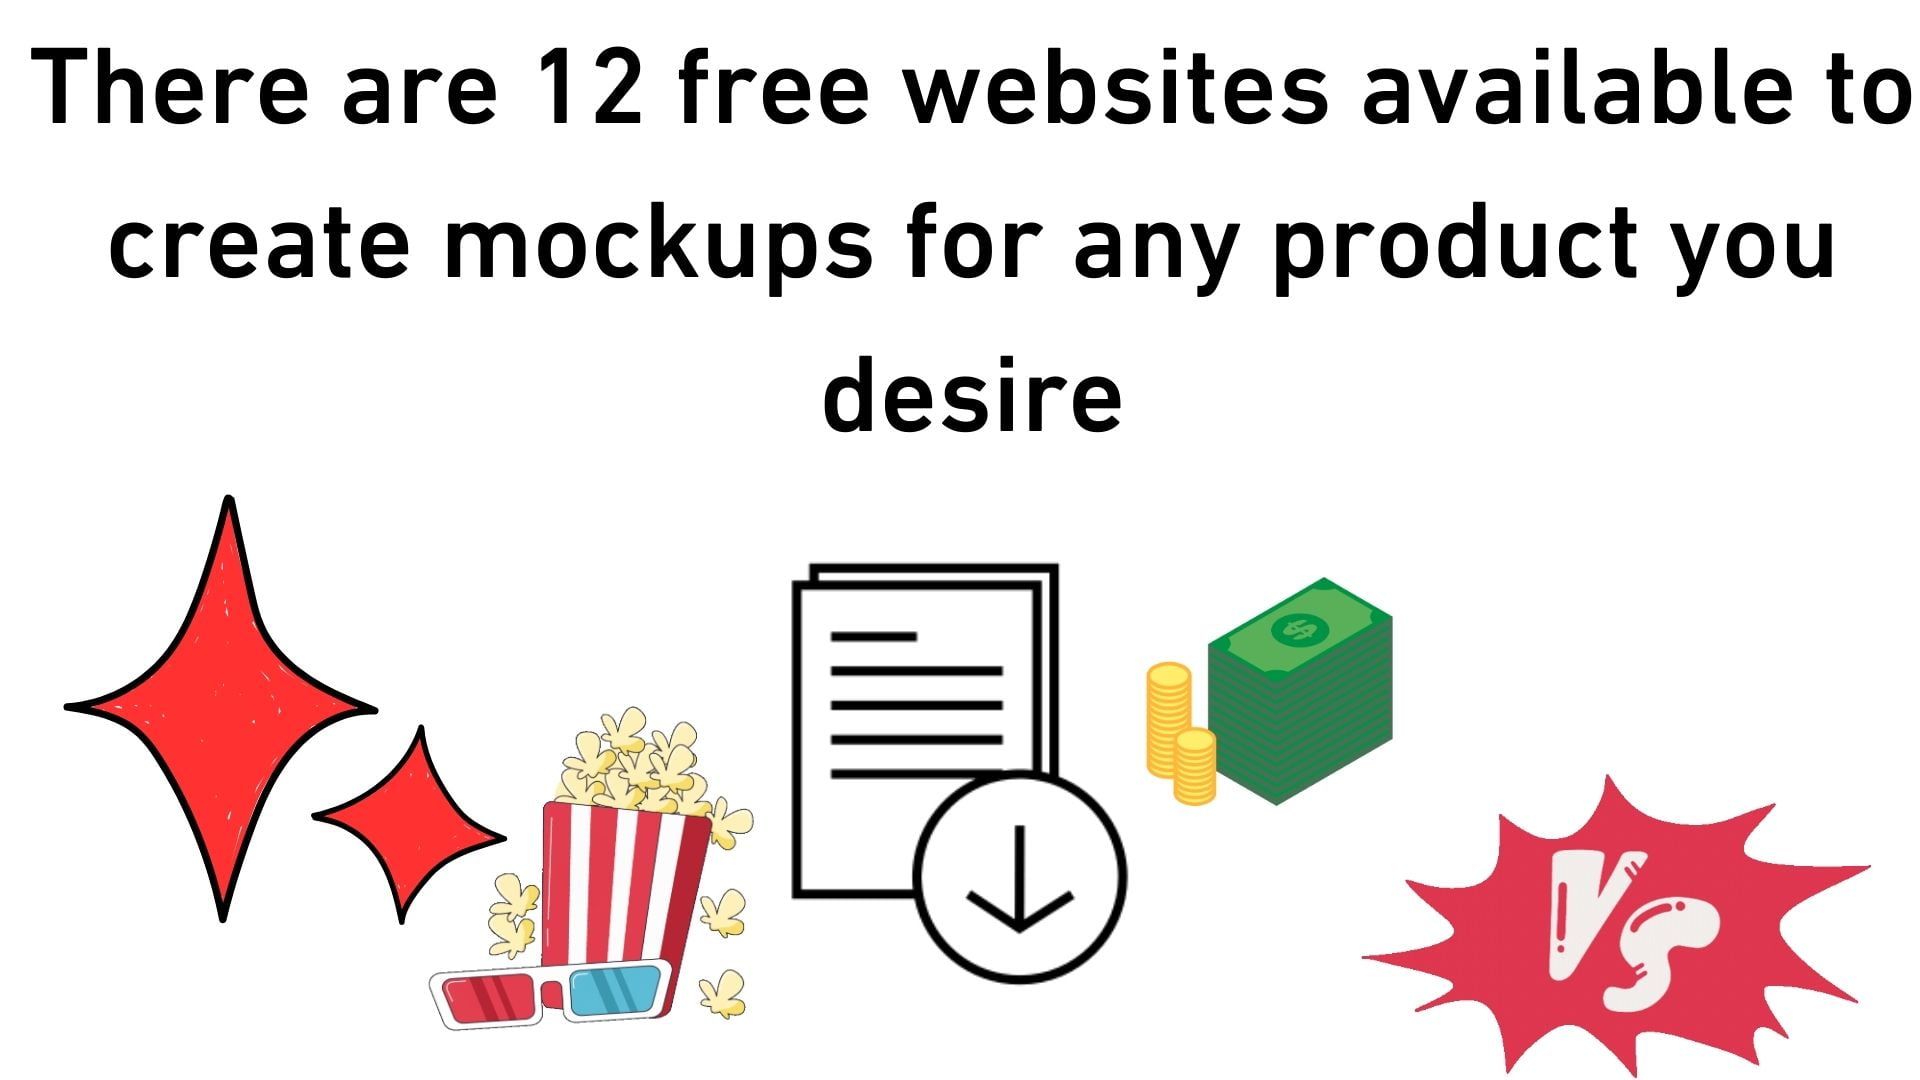 There Are 12 Free Websites Available To Create Mockups For Any Product You Desire